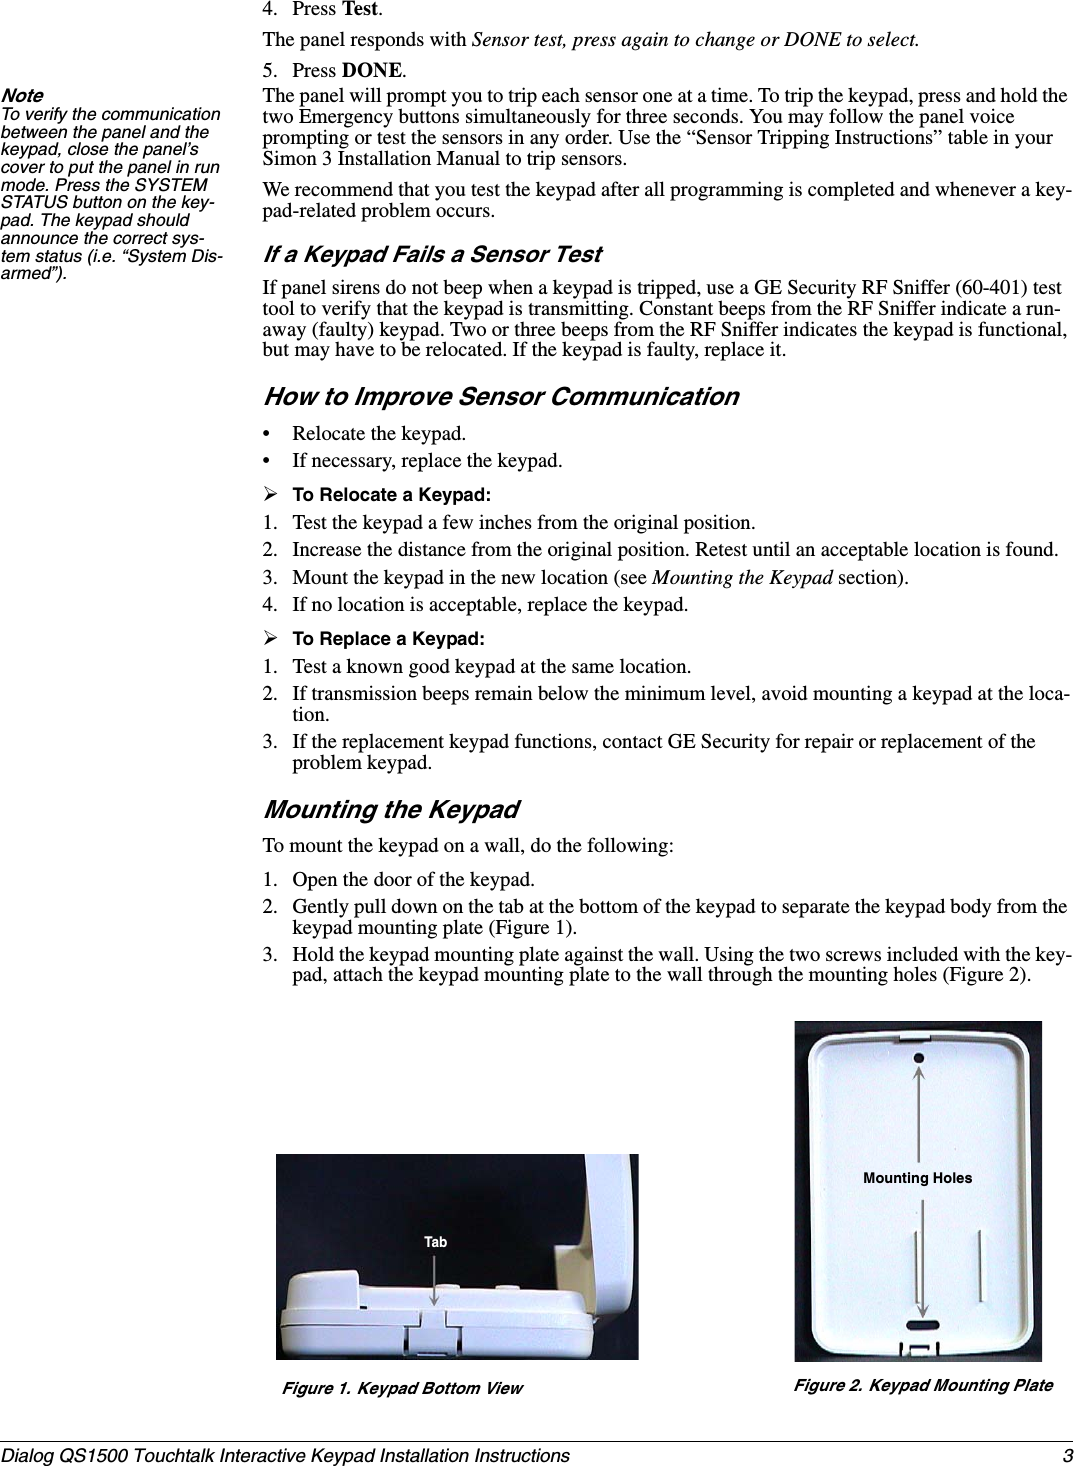 3Dialog QS1500 Touchtalk Interactive Keypad Installation Instructions 4. Press Test.The panel responds with Sensor test, press again to change or DONE to select.5. Press DONE.Note To verify the communication between the panel and the keypad, close the panel’s cover to put the panel in run mode. Press the SYSTEM STATUS button on the key-pad. The keypad should announce the correct sys-tem status (i.e. “System Dis-armed”).The panel will prompt you to trip each sensor one at a time. To trip the keypad, press and hold the two Emergency buttons simultaneously for three seconds. You may follow the panel voice prompting or test the sensors in any order. Use the “Sensor Tripping Instructions” table in your Simon 3 Installation Manual to trip sensors.We recommend that you test the keypad after all programming is completed and whenever a key-pad-related problem occurs.If a Keypad Fails a Sensor TestIf panel sirens do not beep when a keypad is tripped, use a GE Security RF Sniffer (60-401) test tool to verify that the keypad is transmitting. Constant beeps from the RF Sniffer indicate a run-away (faulty) keypad. Two or three beeps from the RF Sniffer indicates the keypad is functional, but may have to be relocated. If the keypad is faulty, replace it.How to Improve Sensor Communication• Relocate the keypad.• If necessary, replace the keypad.¾To Relocate a Keypad:1. Test the keypad a few inches from the original position.2. Increase the distance from the original position. Retest until an acceptable location is found.3. Mount the keypad in the new location (see Mounting the Keypad section).4. If no location is acceptable, replace the keypad.¾To Replace a Keypad:1. Test a known good keypad at the same location.2. If transmission beeps remain below the minimum level, avoid mounting a keypad at the loca-tion.3. If the replacement keypad functions, contact GE Security for repair or replacement of the problem keypad.Mounting the KeypadTo mount the keypad on a wall, do the following:1. Open the door of the keypad.2. Gently pull down on the tab at the bottom of the keypad to separate the keypad body from the keypad mounting plate (Figure 1).3. Hold the keypad mounting plate against the wall. Using the two screws included with the key-pad, attach the keypad mounting plate to the wall through the mounting holes (Figure 2).Figure 1. Keypad Bottom View Figure 2. Keypad Mounting PlateMounting HolesTab